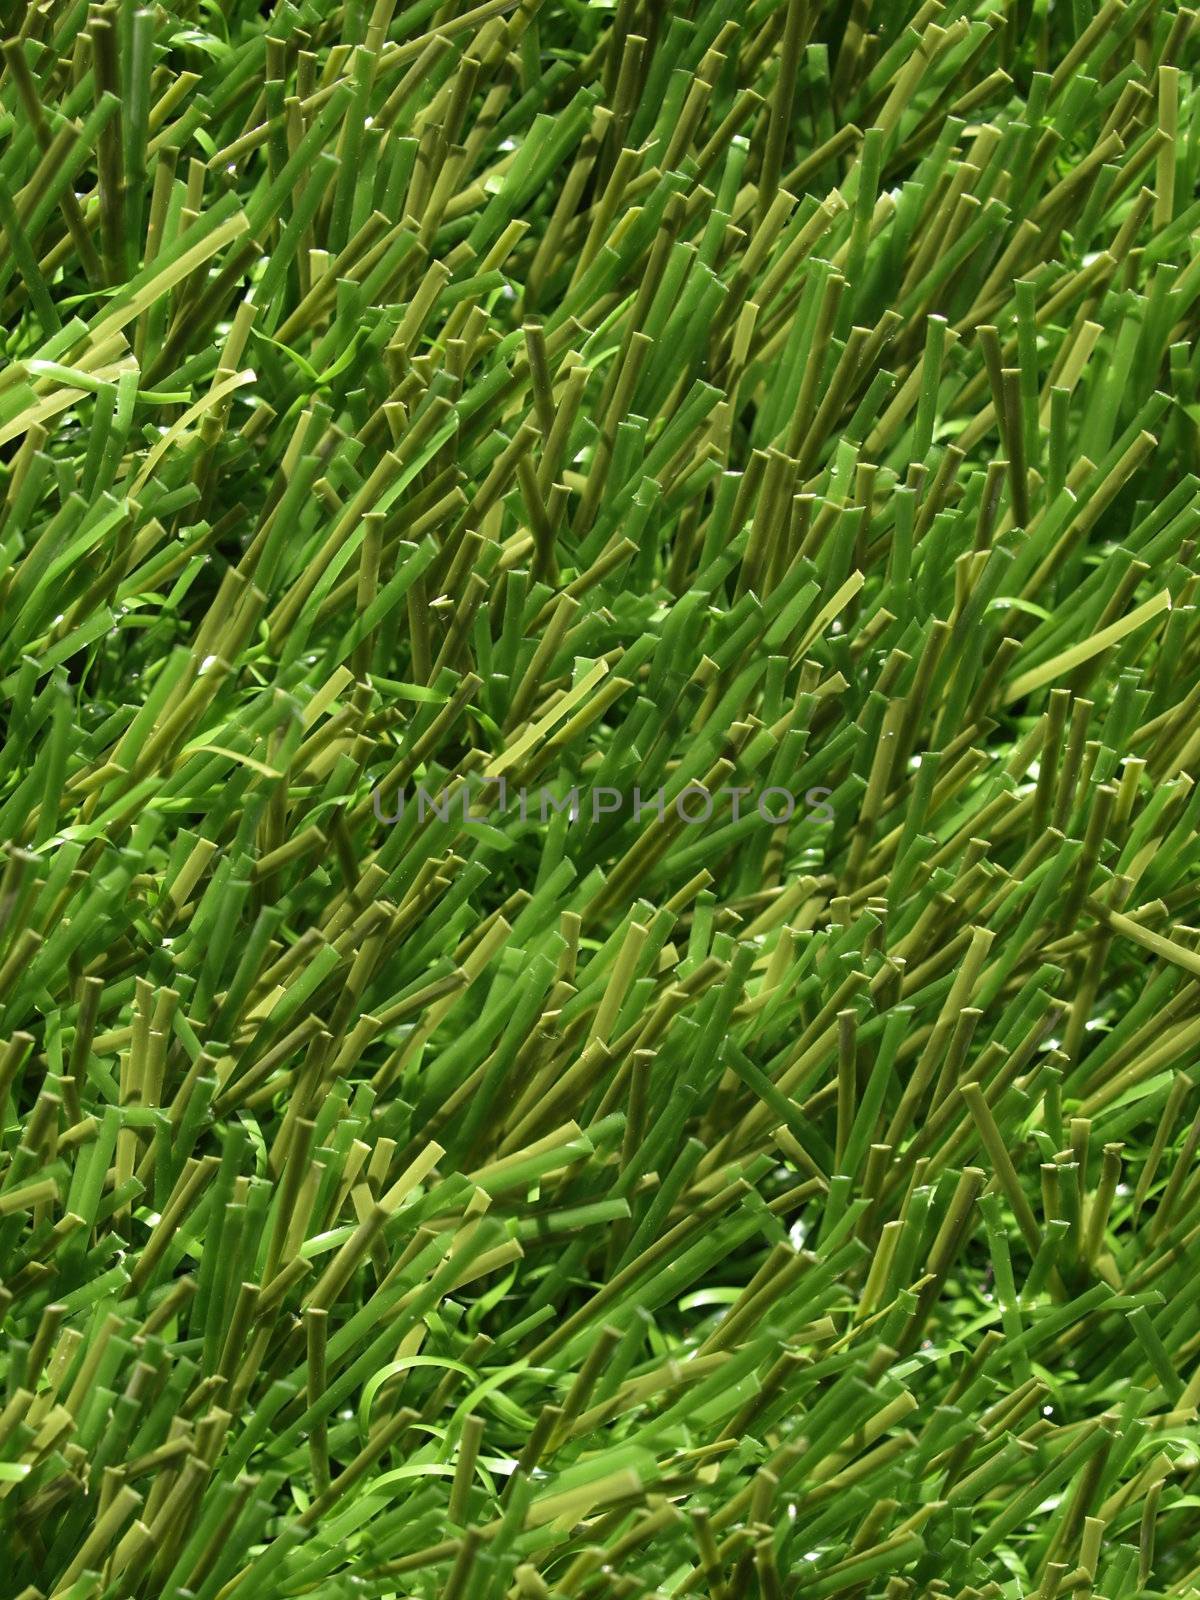 Detail of green grass artificial lawn meadow, useful as a background